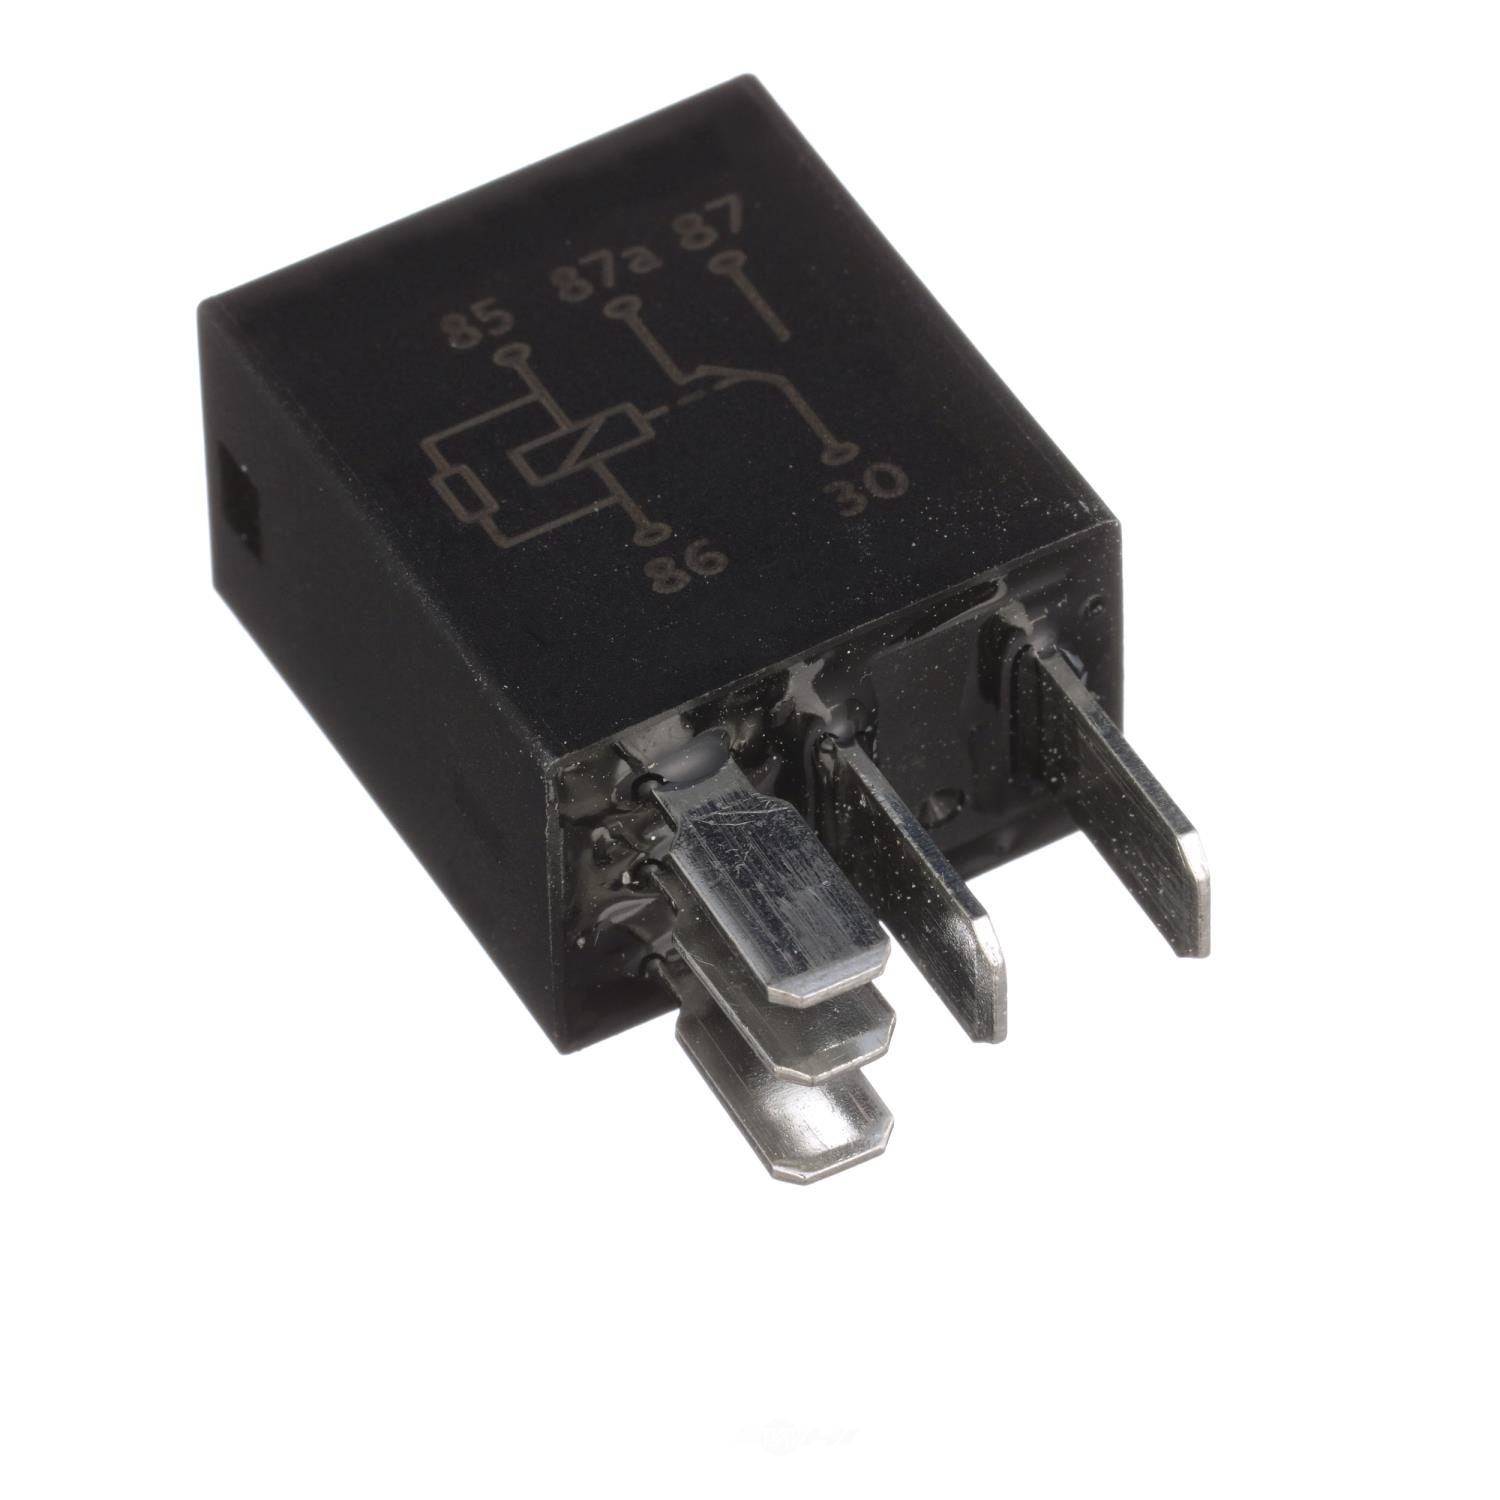 STANDARD T-SERIES - Cruise Control Relay - STT RY345T